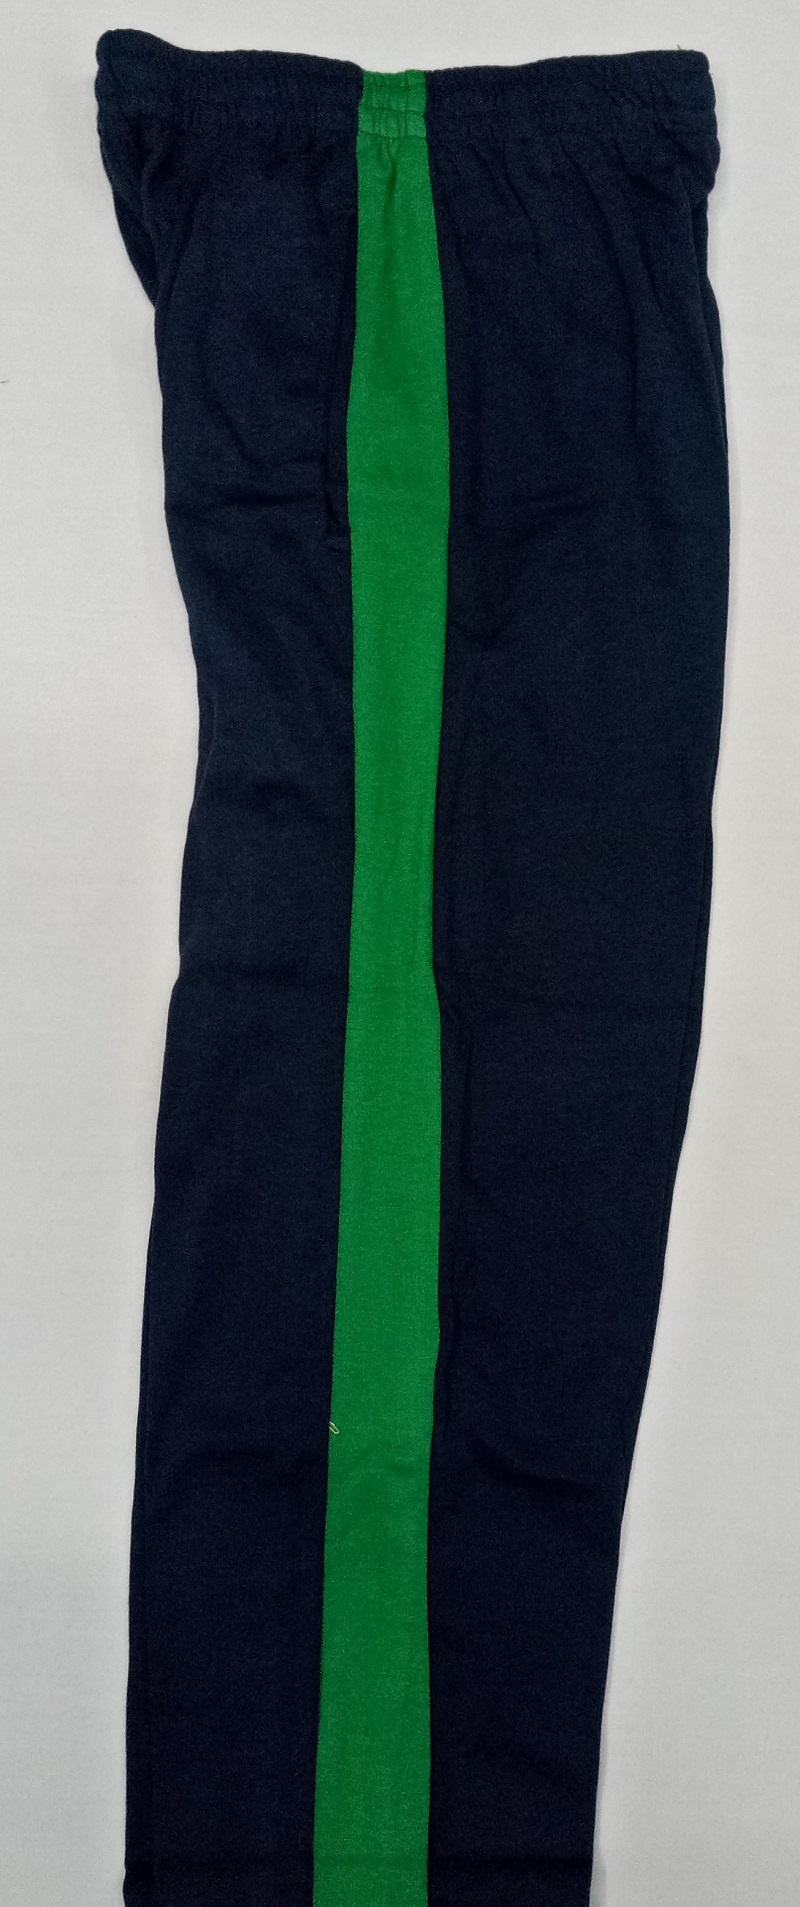 TRACK PANT - GREEN HOUSE